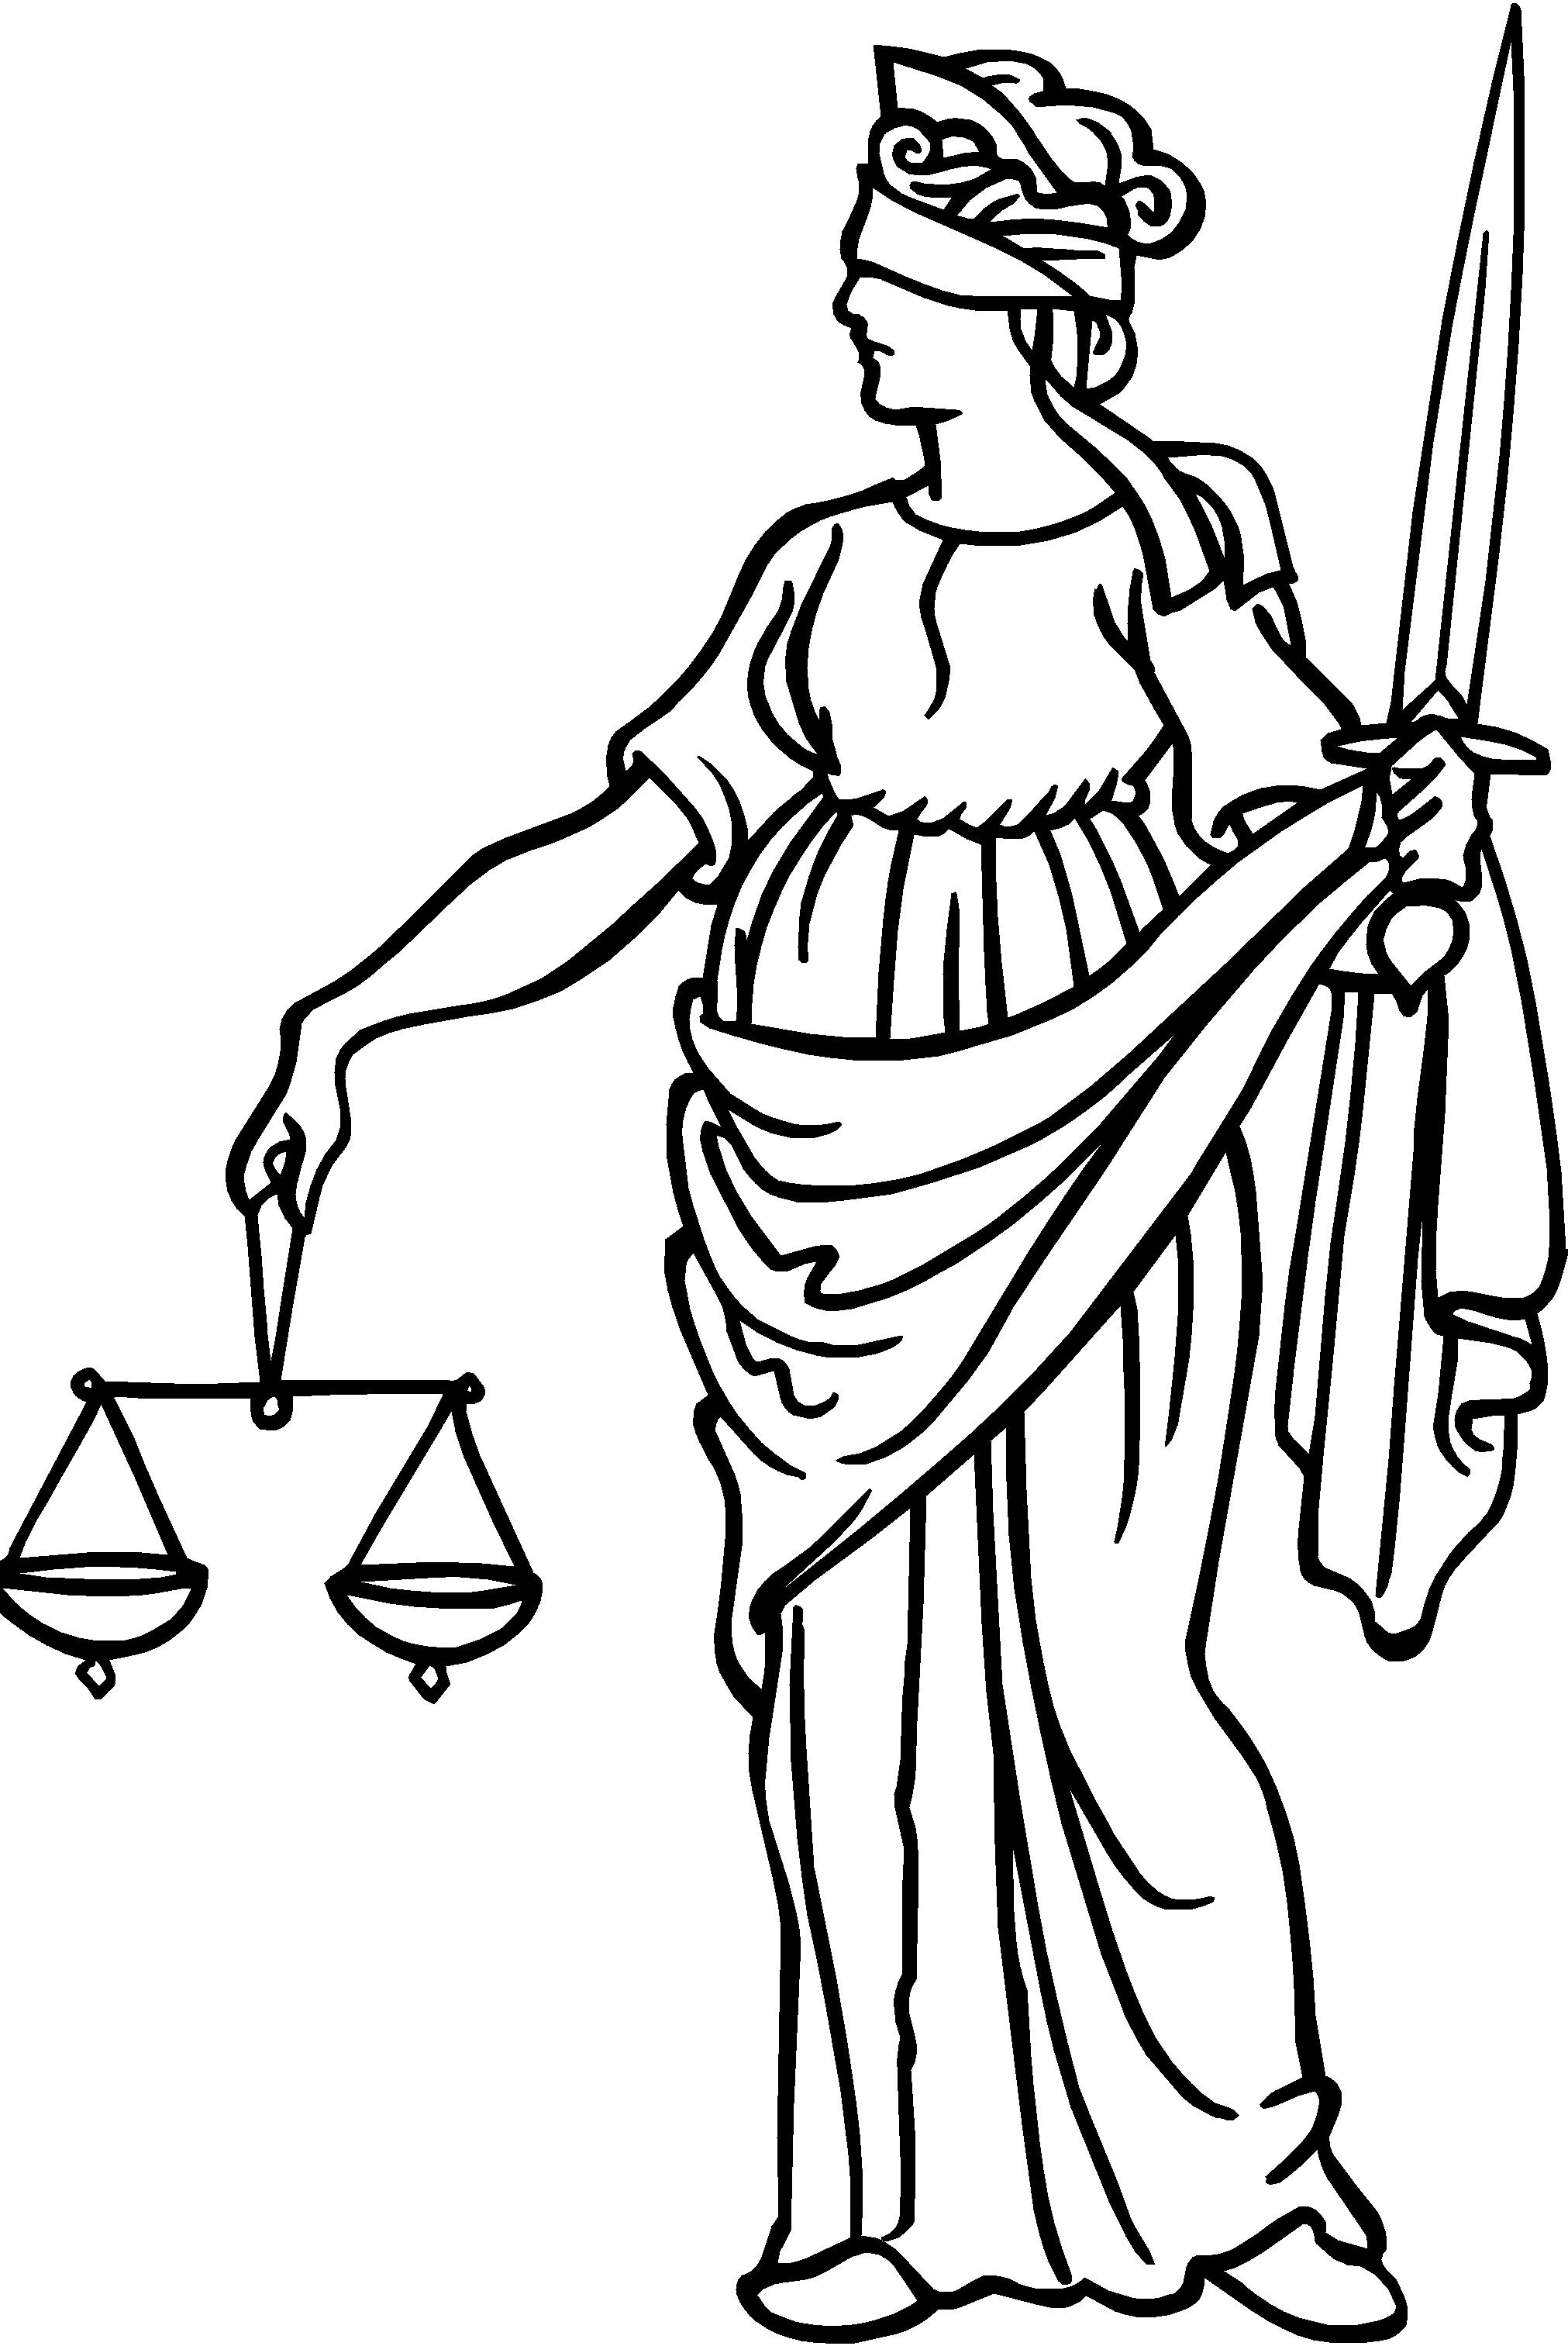 Scales Of Justice Vector Free Download - ClipArt Best